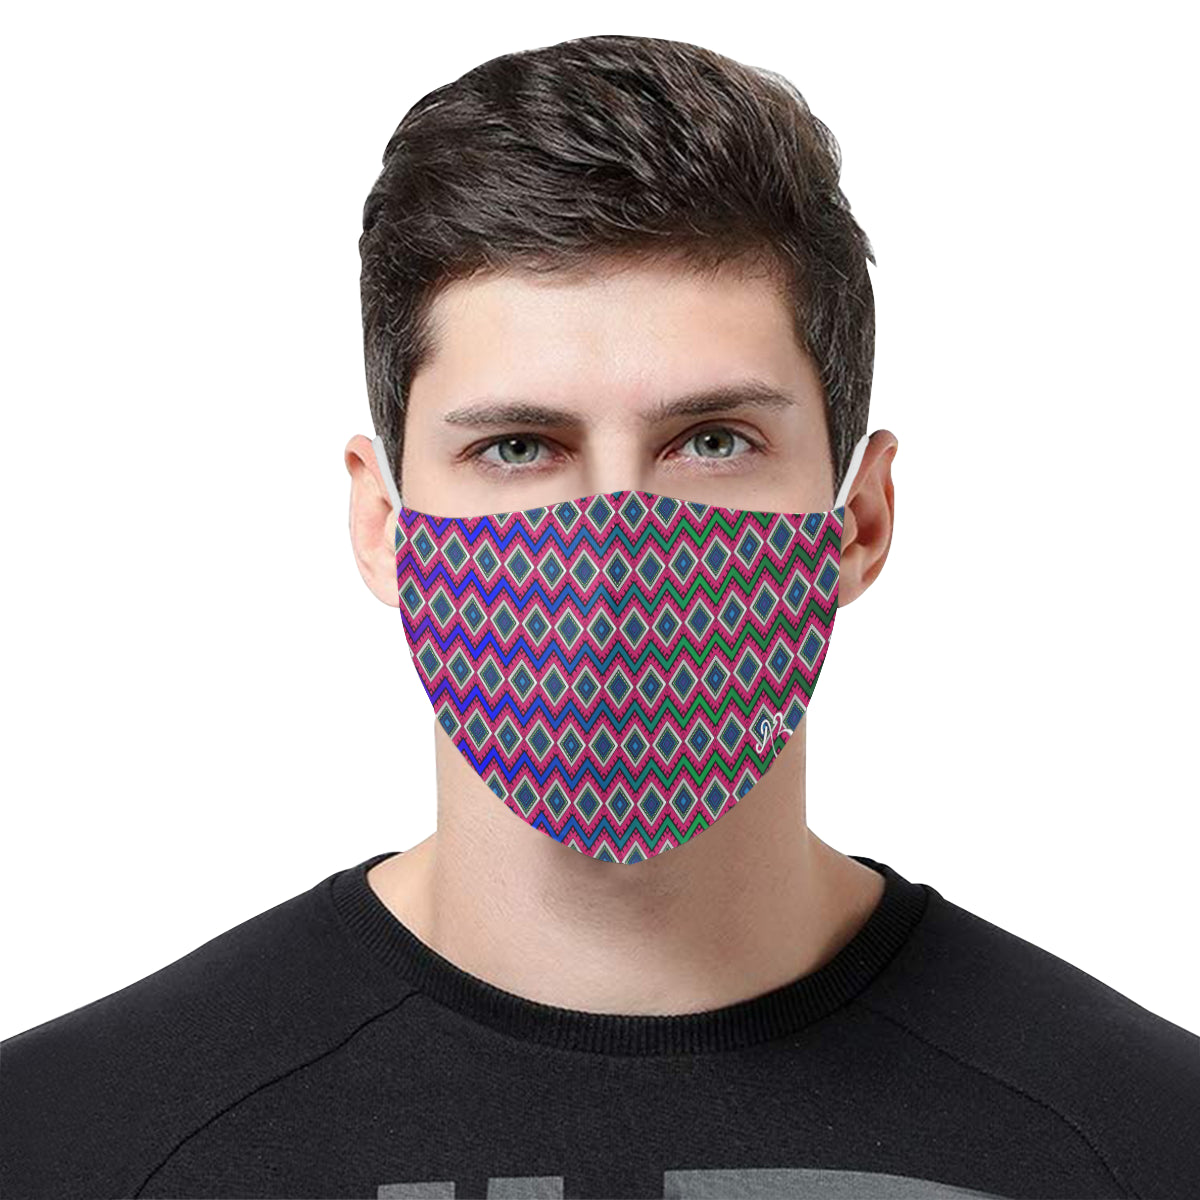 Quadrangle Print Cotton Fabric Face Mask with Filter Slot & Adjustable Strap (Pack of 5) - Non-medical use